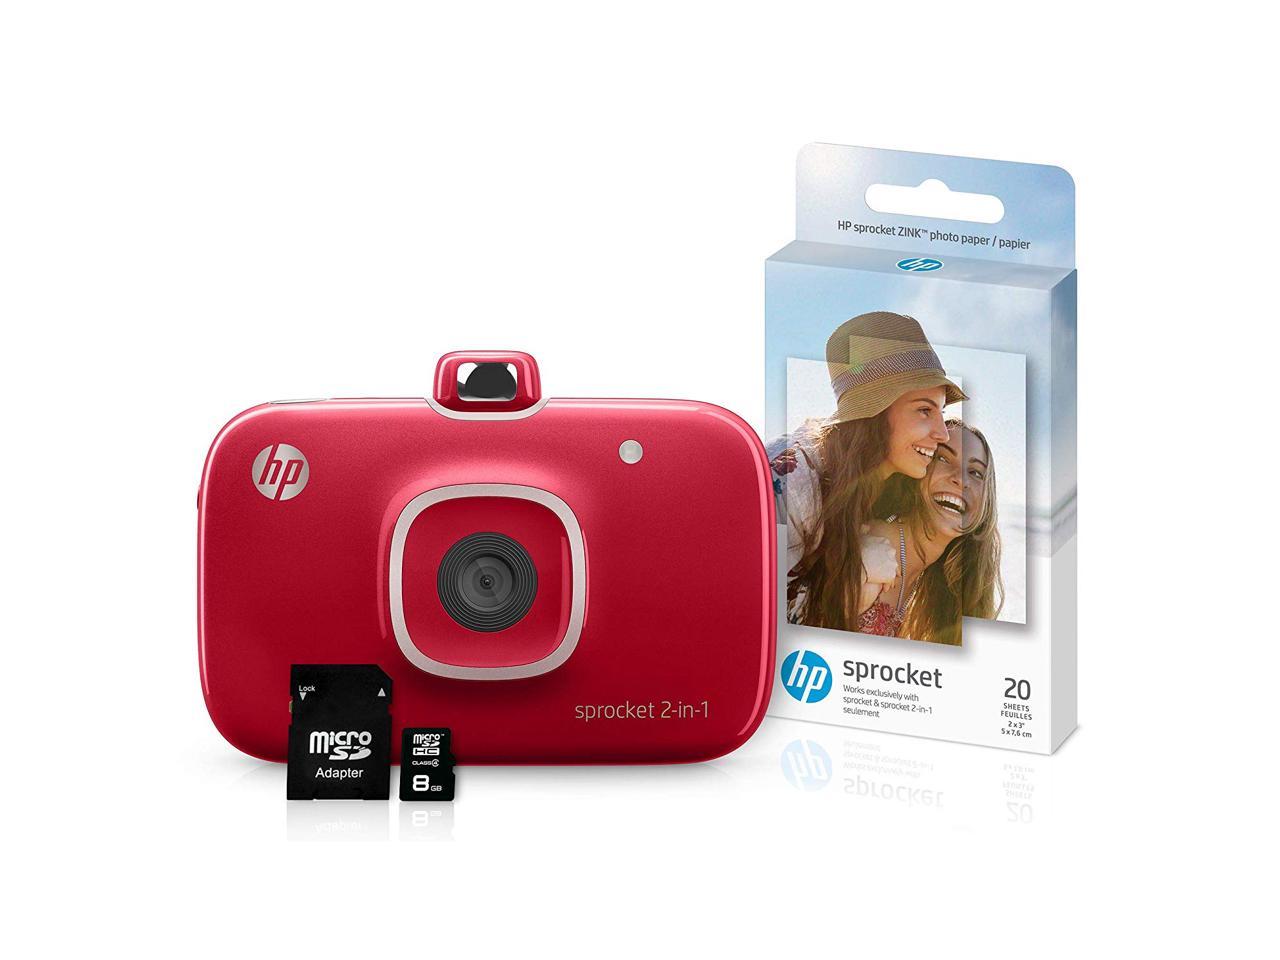 HP Sprocket 2-in-1 Portable Photo Printer & Instant Camera Bundle with 8GB MicroSD Card and ZINK Photo Paper – Red (5MS97A)